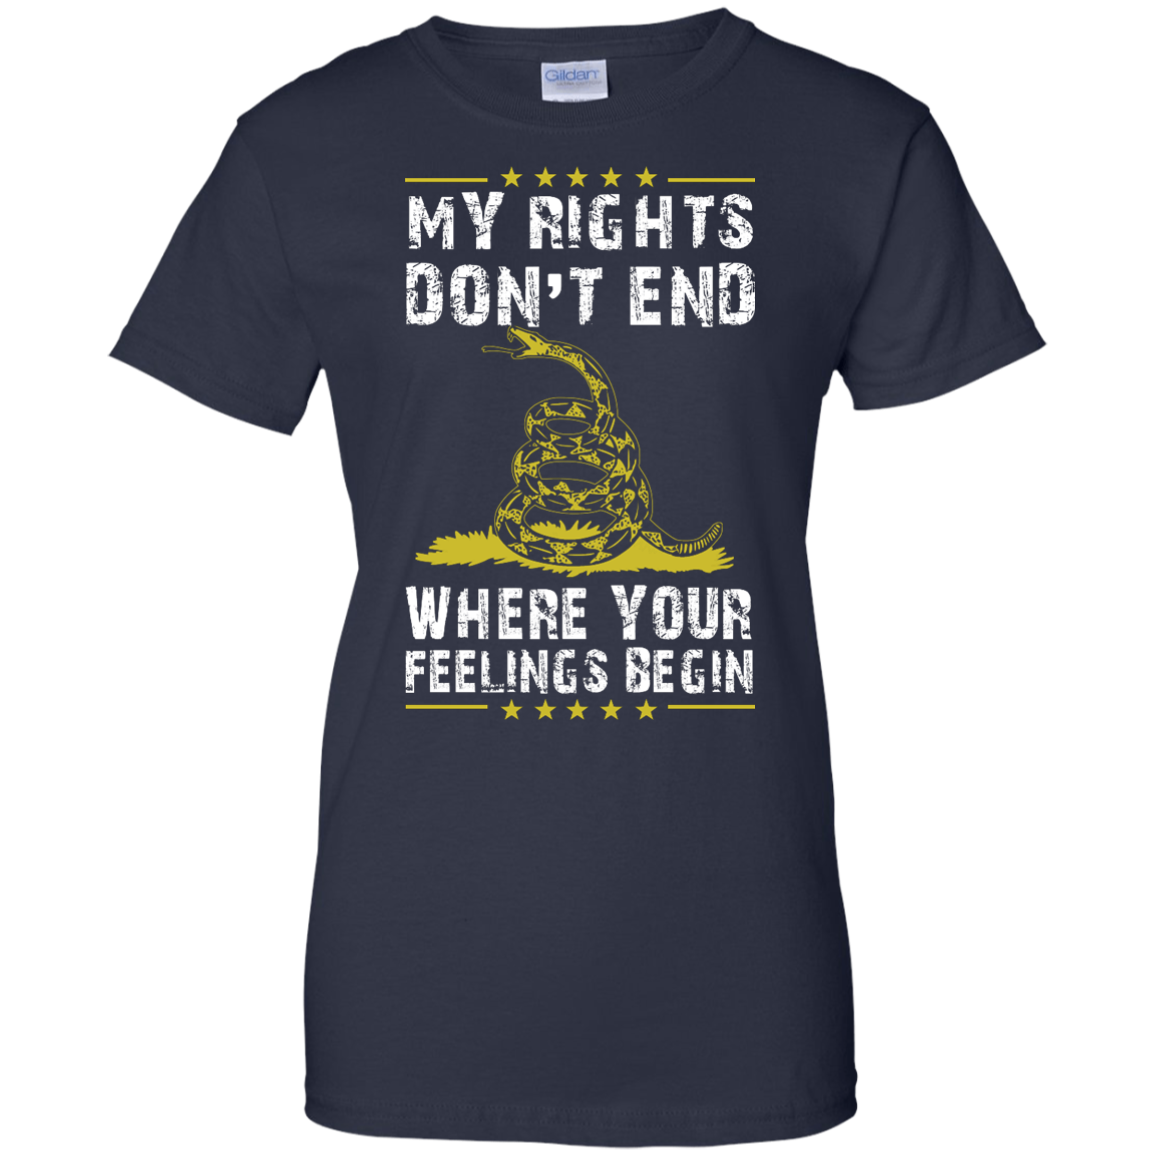 My rights don't end where your feelings begin vneck, tshirt, tank, hoodie